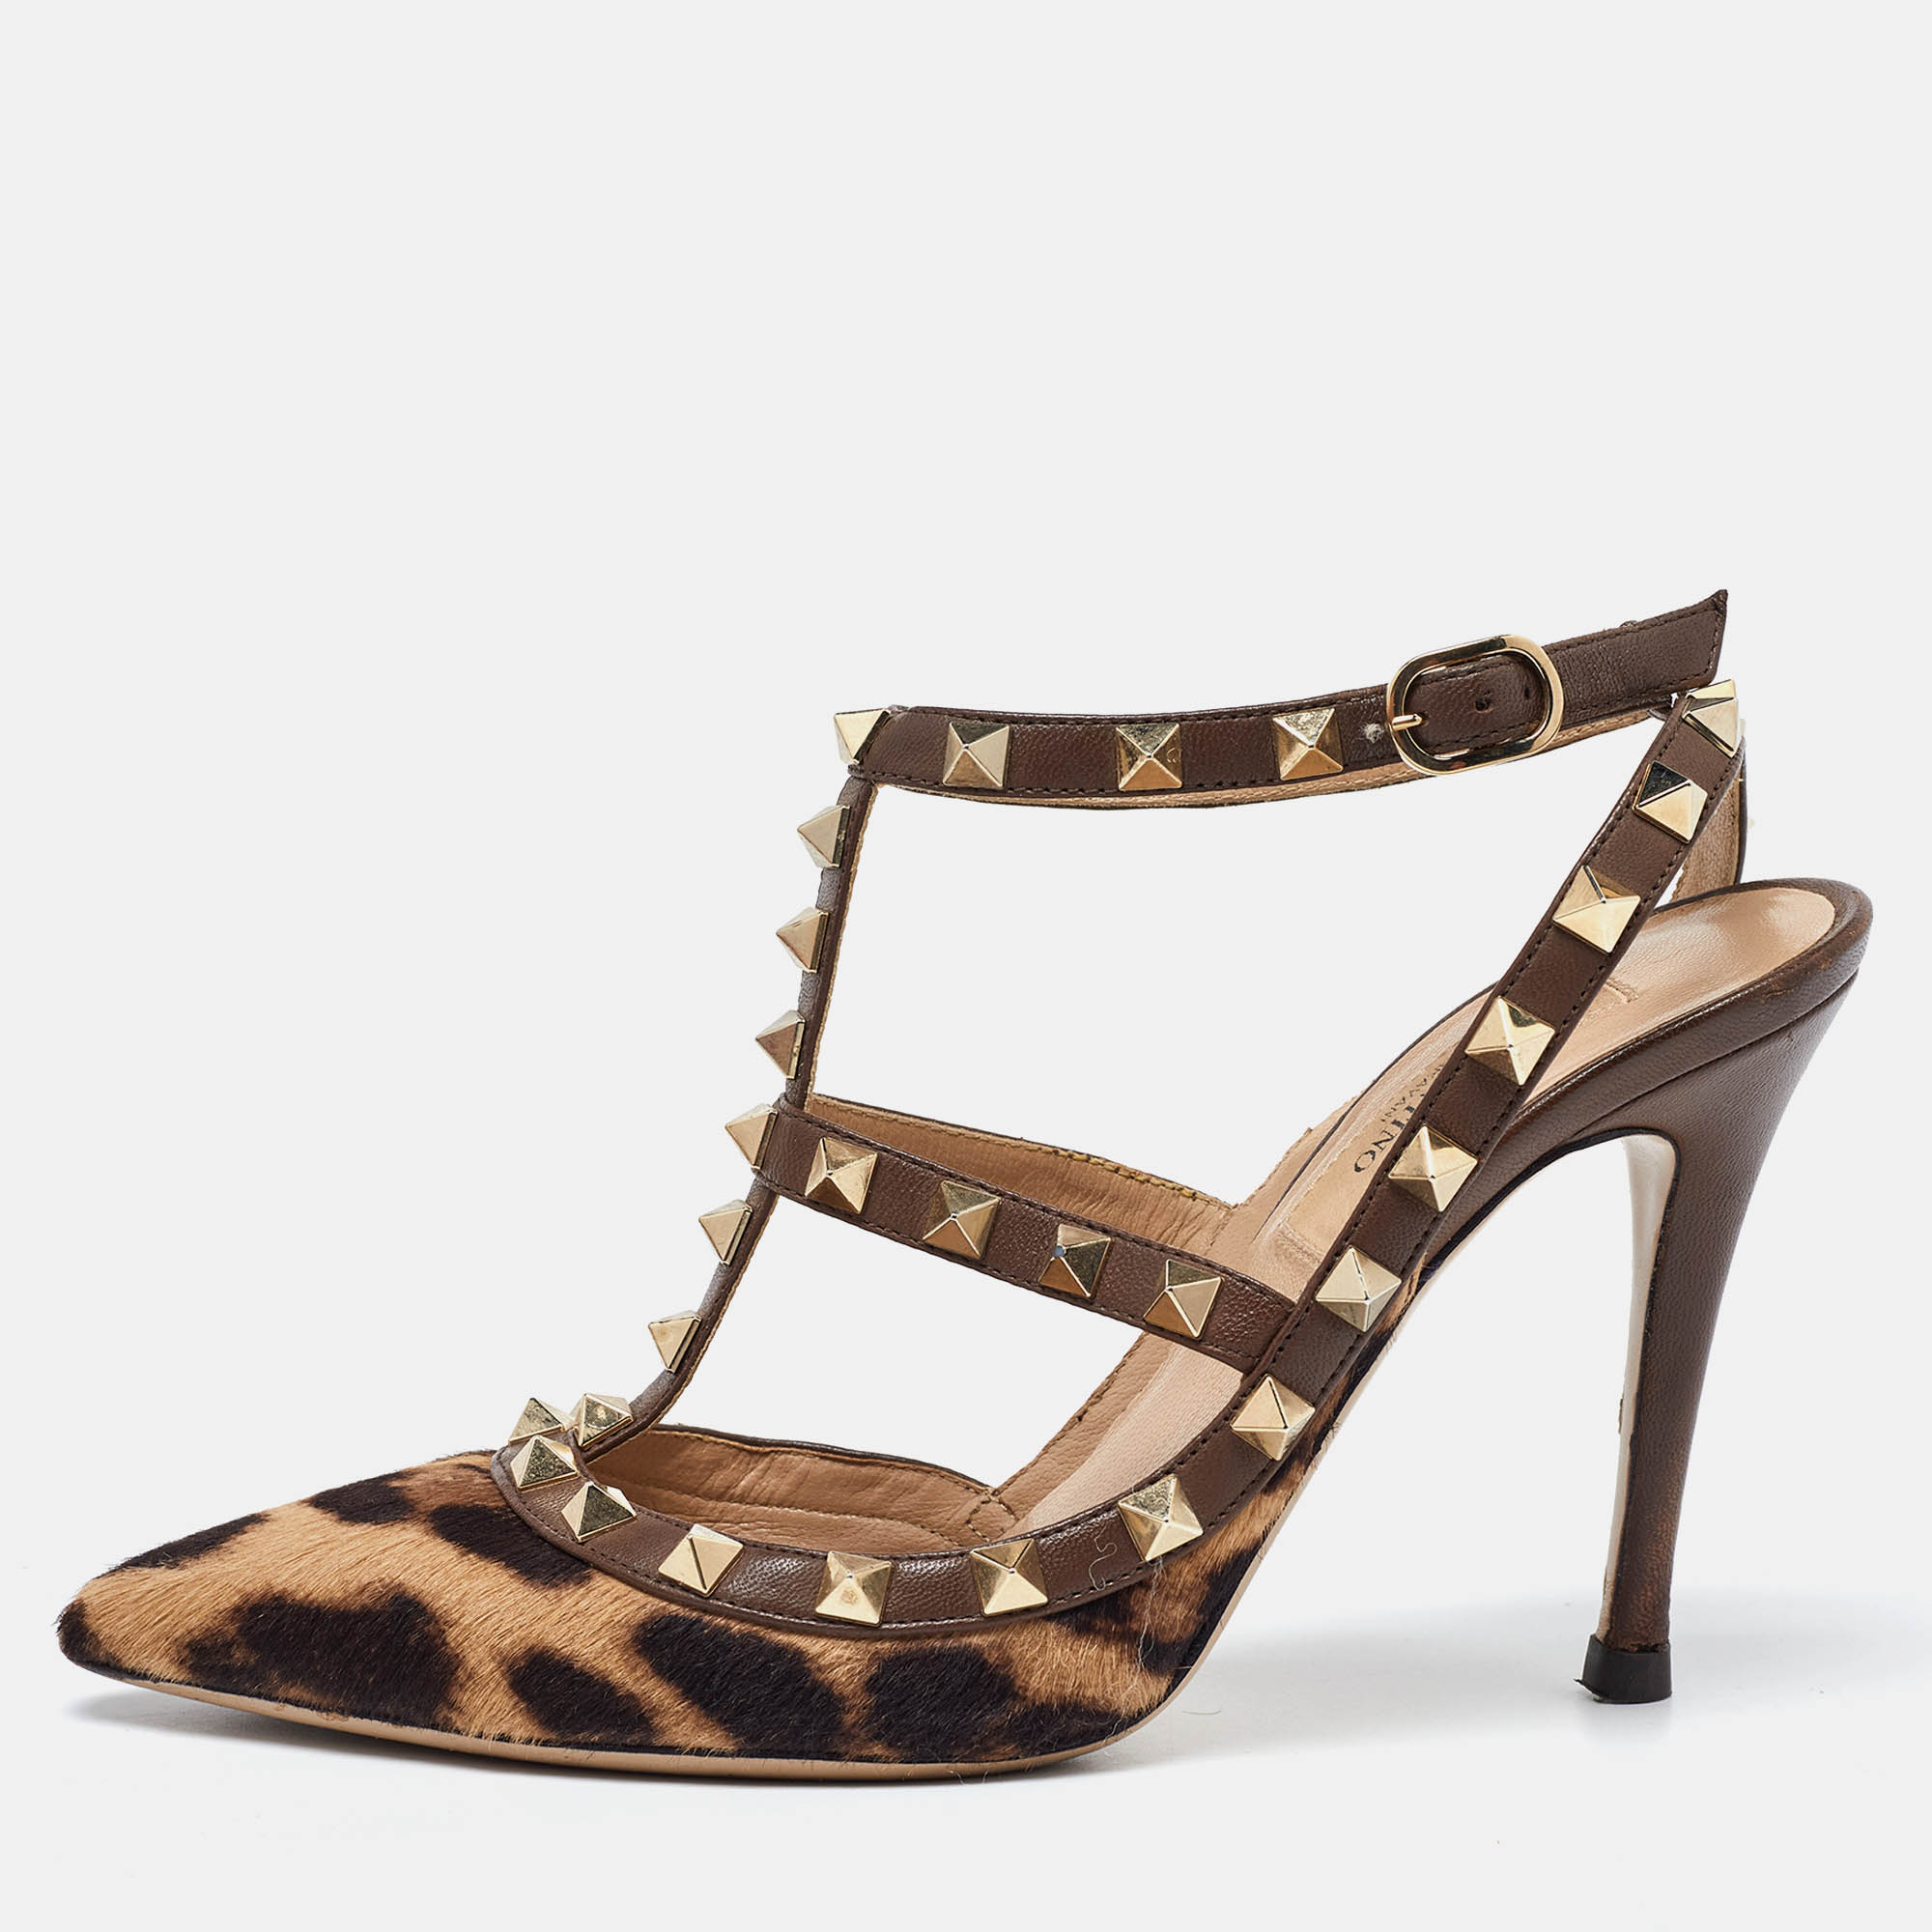 Valentino brown leopard print calfhair and leather rockstud caged sandals size 36.5